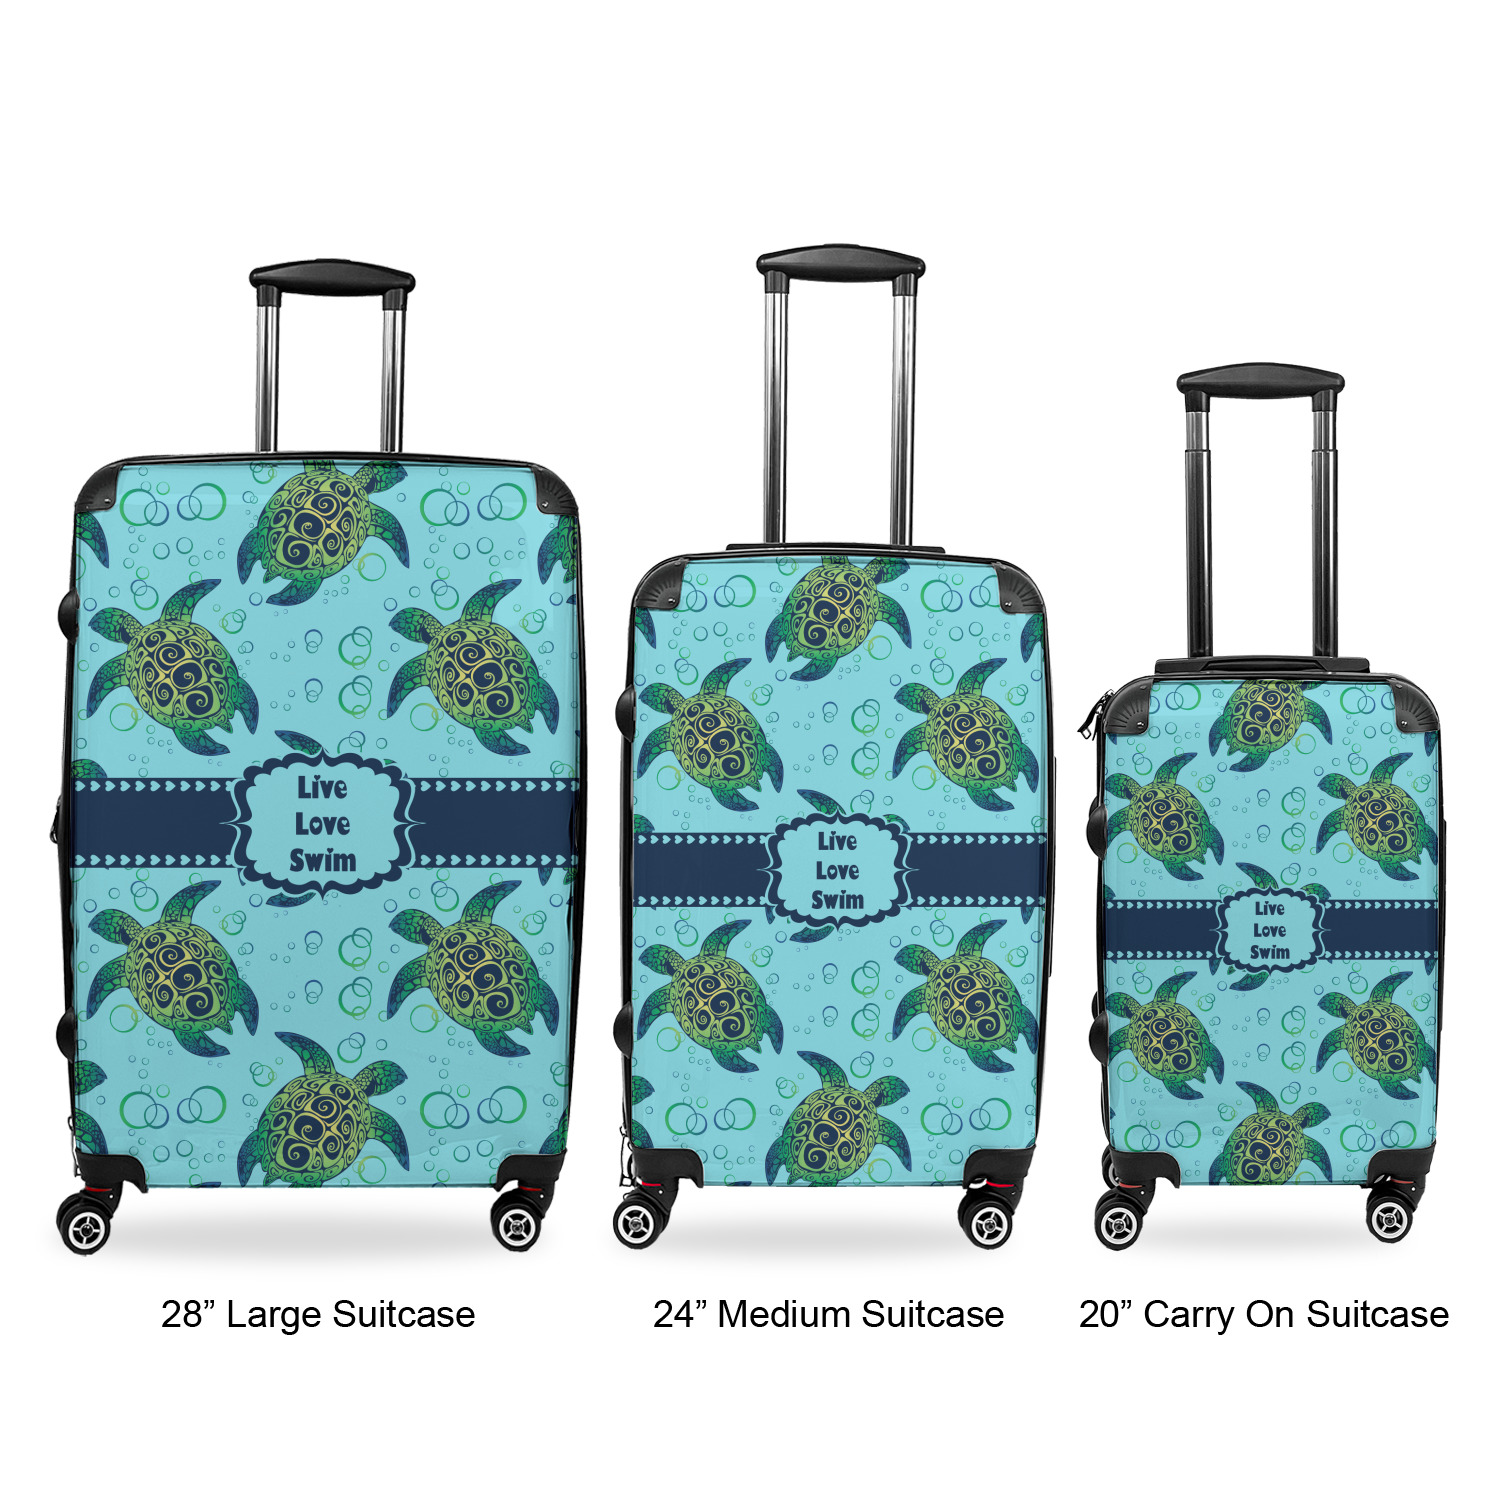 seaturtle luggage carry on with wheels set